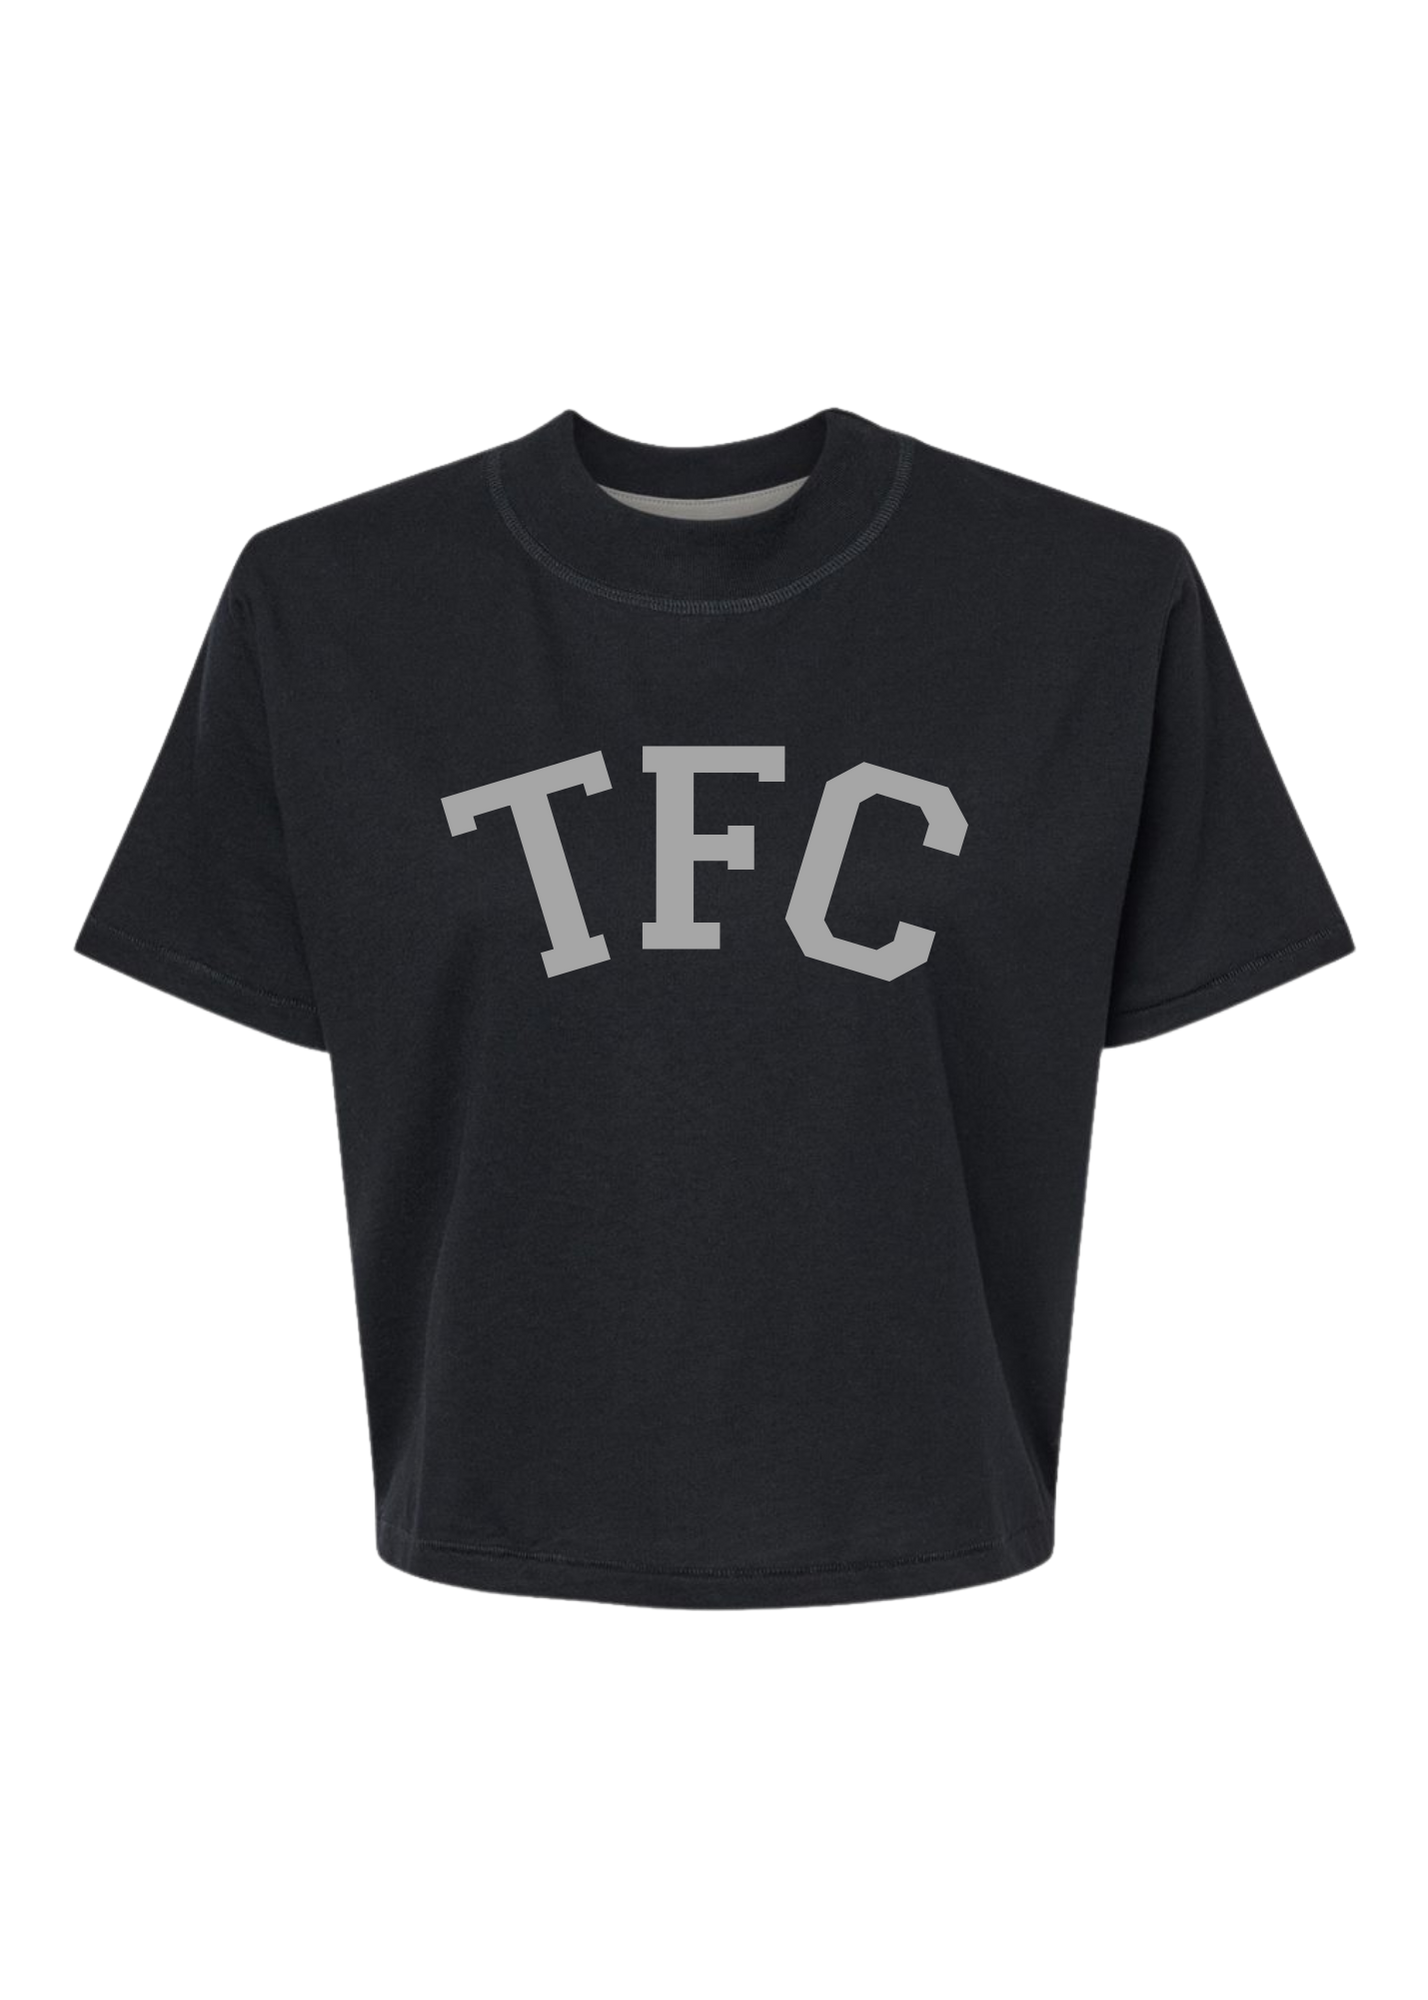 TFC Foil | Mom Crop Tee-Sister Shirts-Sister Shirts, Cute & Custom Tees for Mama & Littles in Trussville, Alabama.